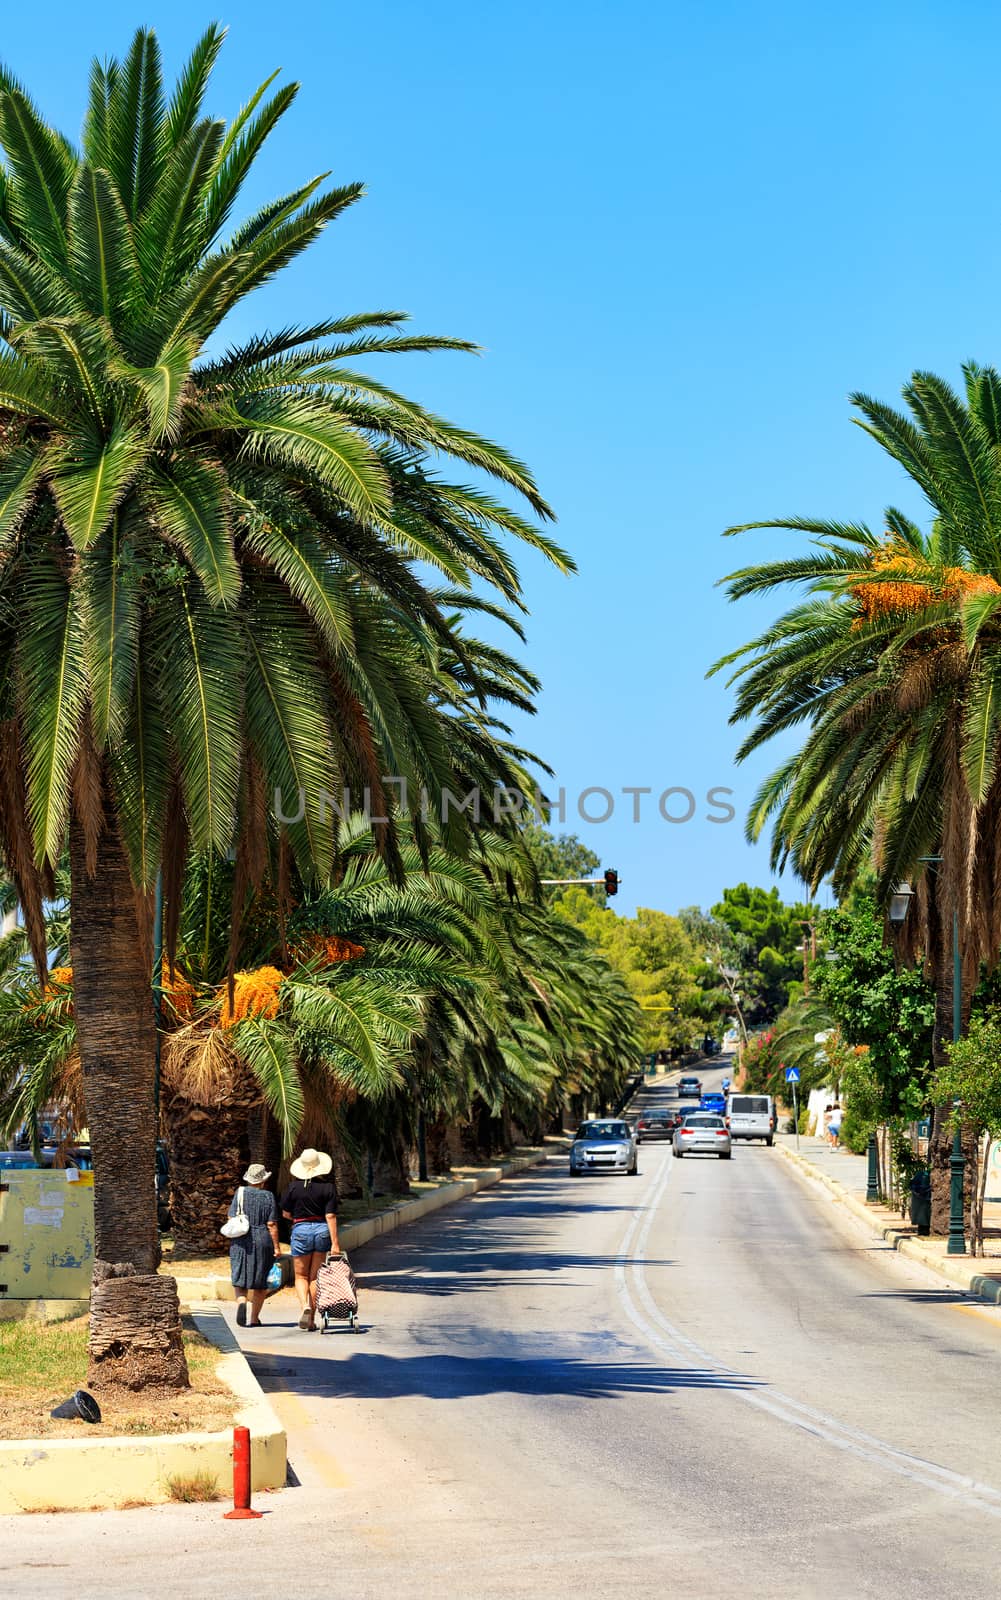 Date palms with fiery orange fruits grow along the roadway, forming a beautiful alley, cars drive along the road, visiting tourists walk and violating the rules of the road in Loutraki, Greece, image with copy space.